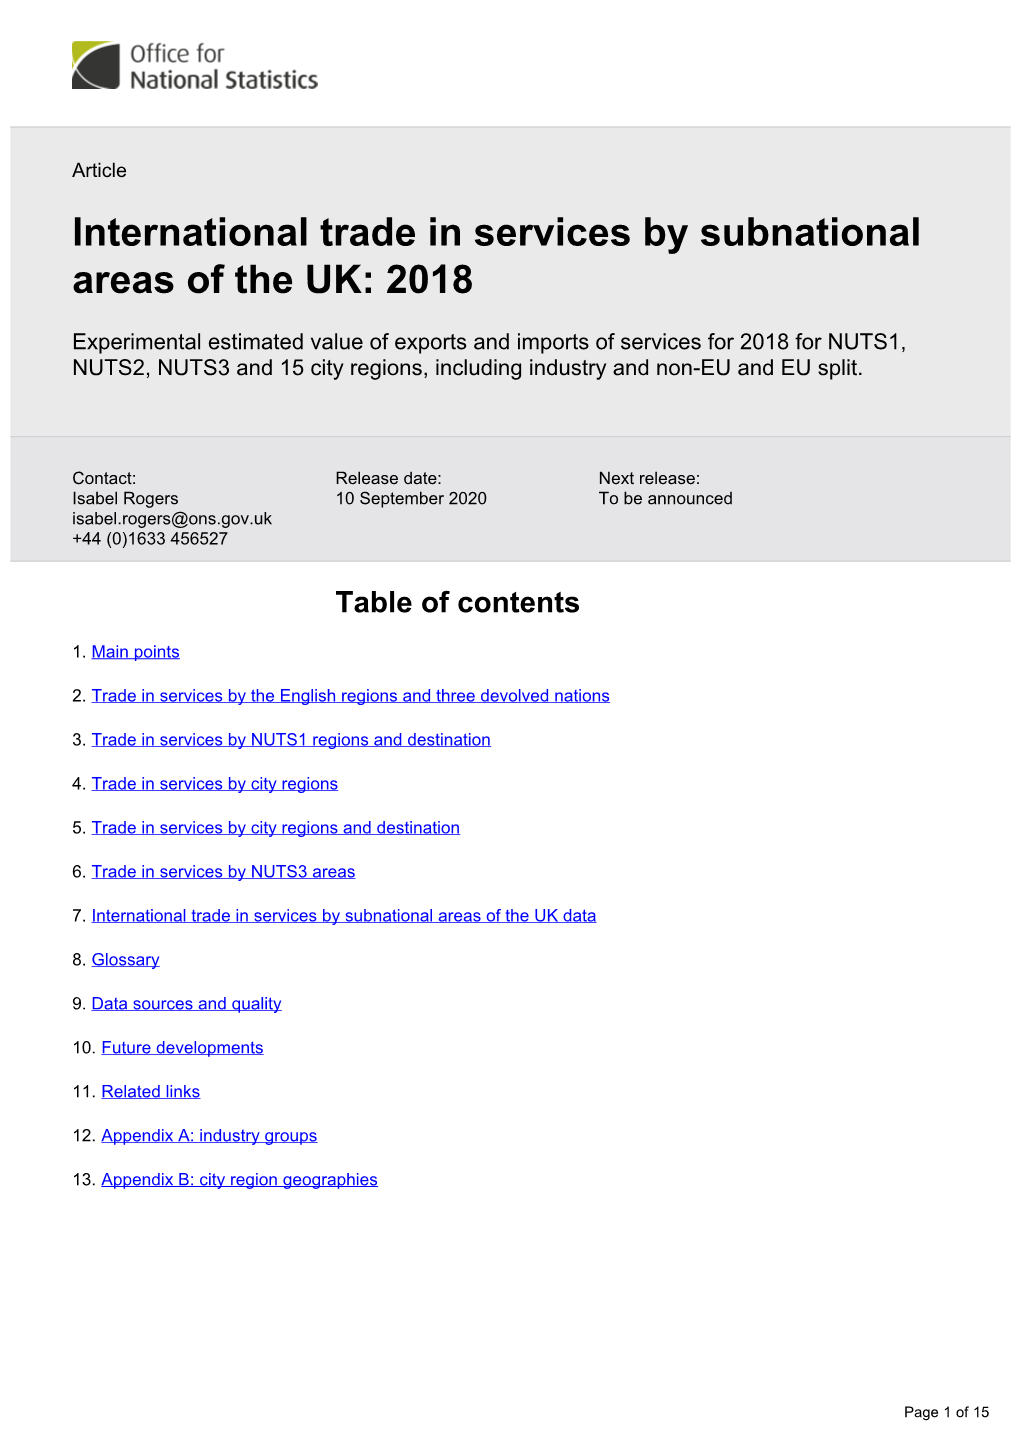 International Trade in Services by Subnational Areas of the UK: 2018